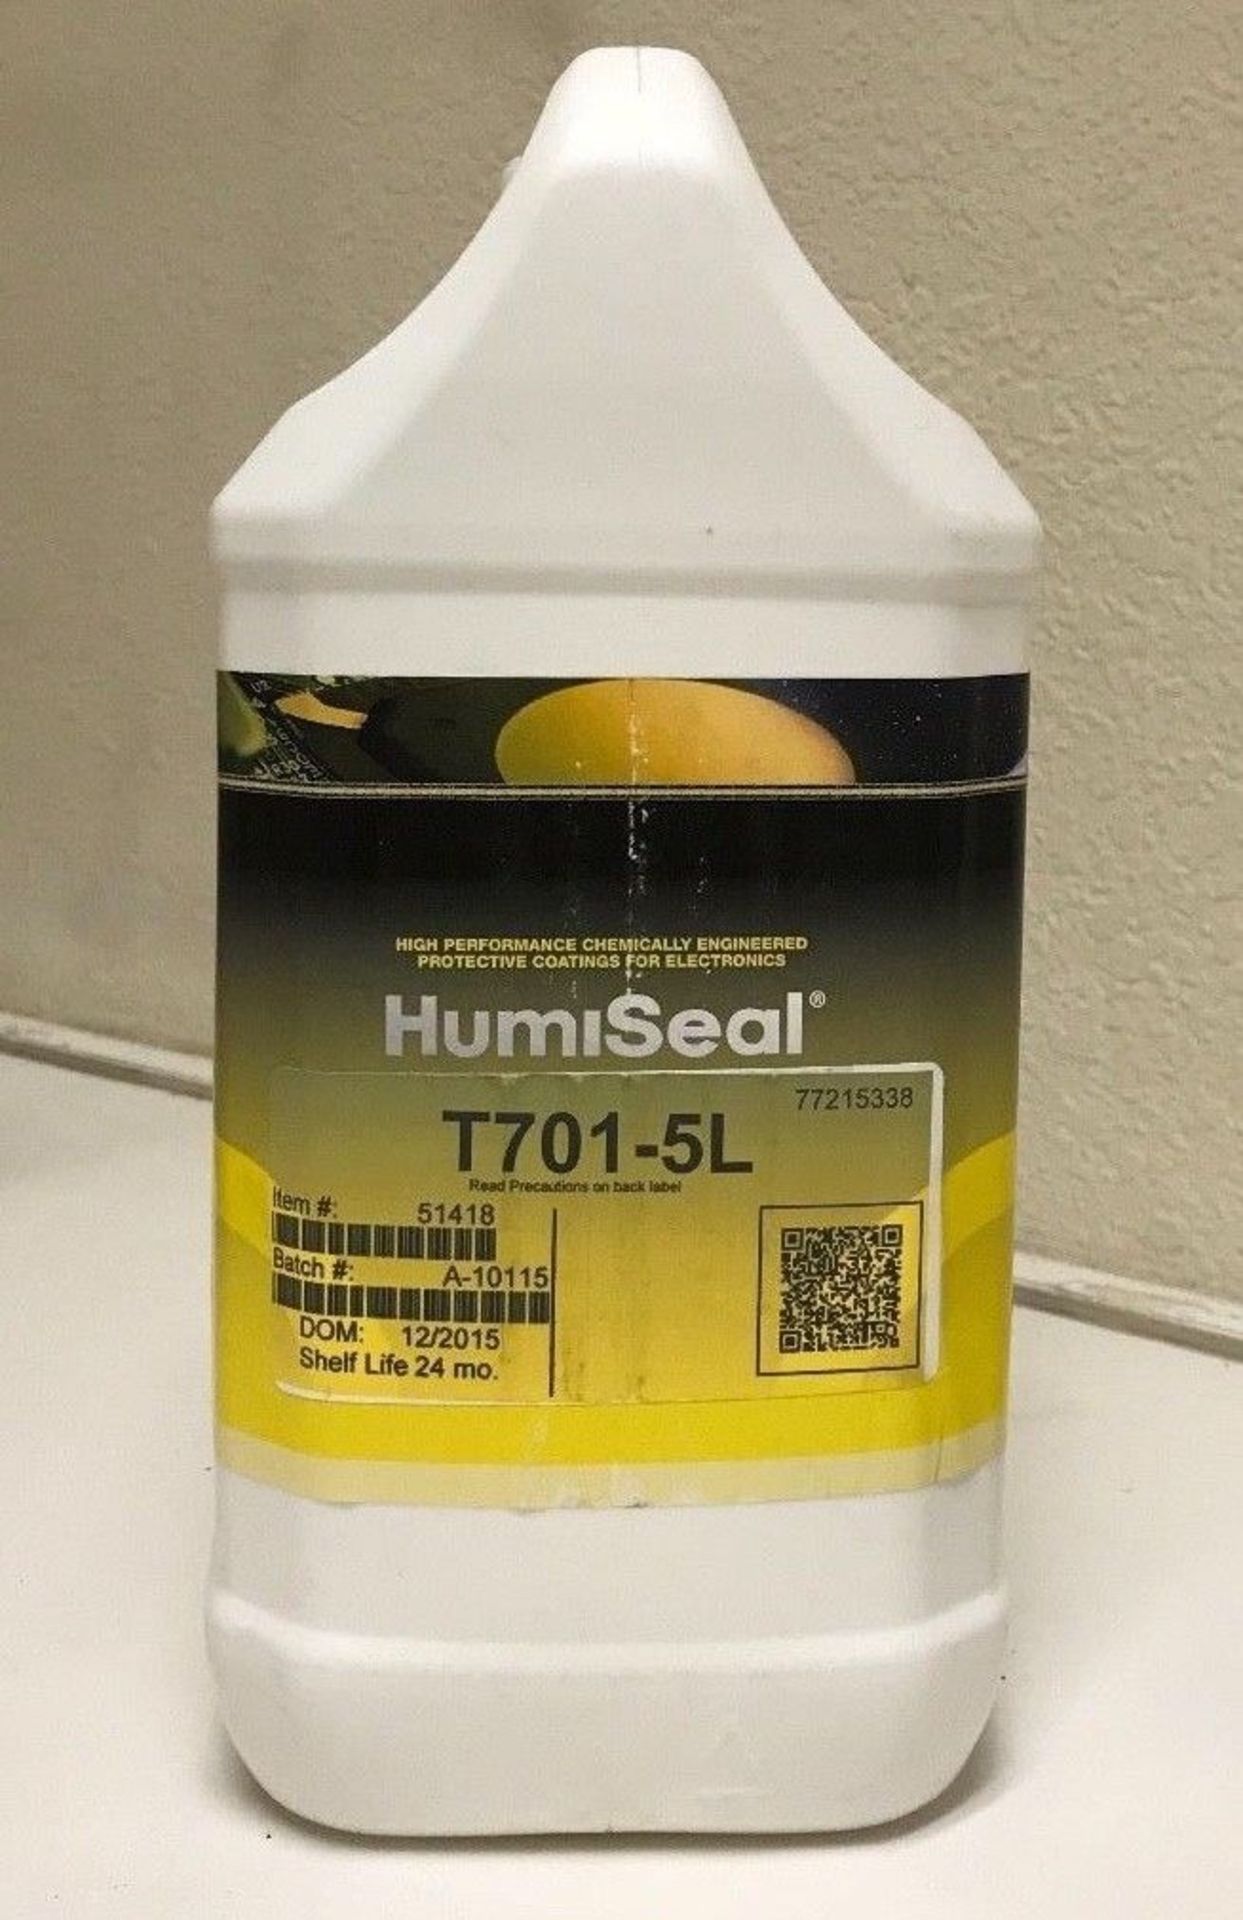 7 BOTTLES HumiSeal T701-5L High Performance Chemically Engineered Protective Coatings